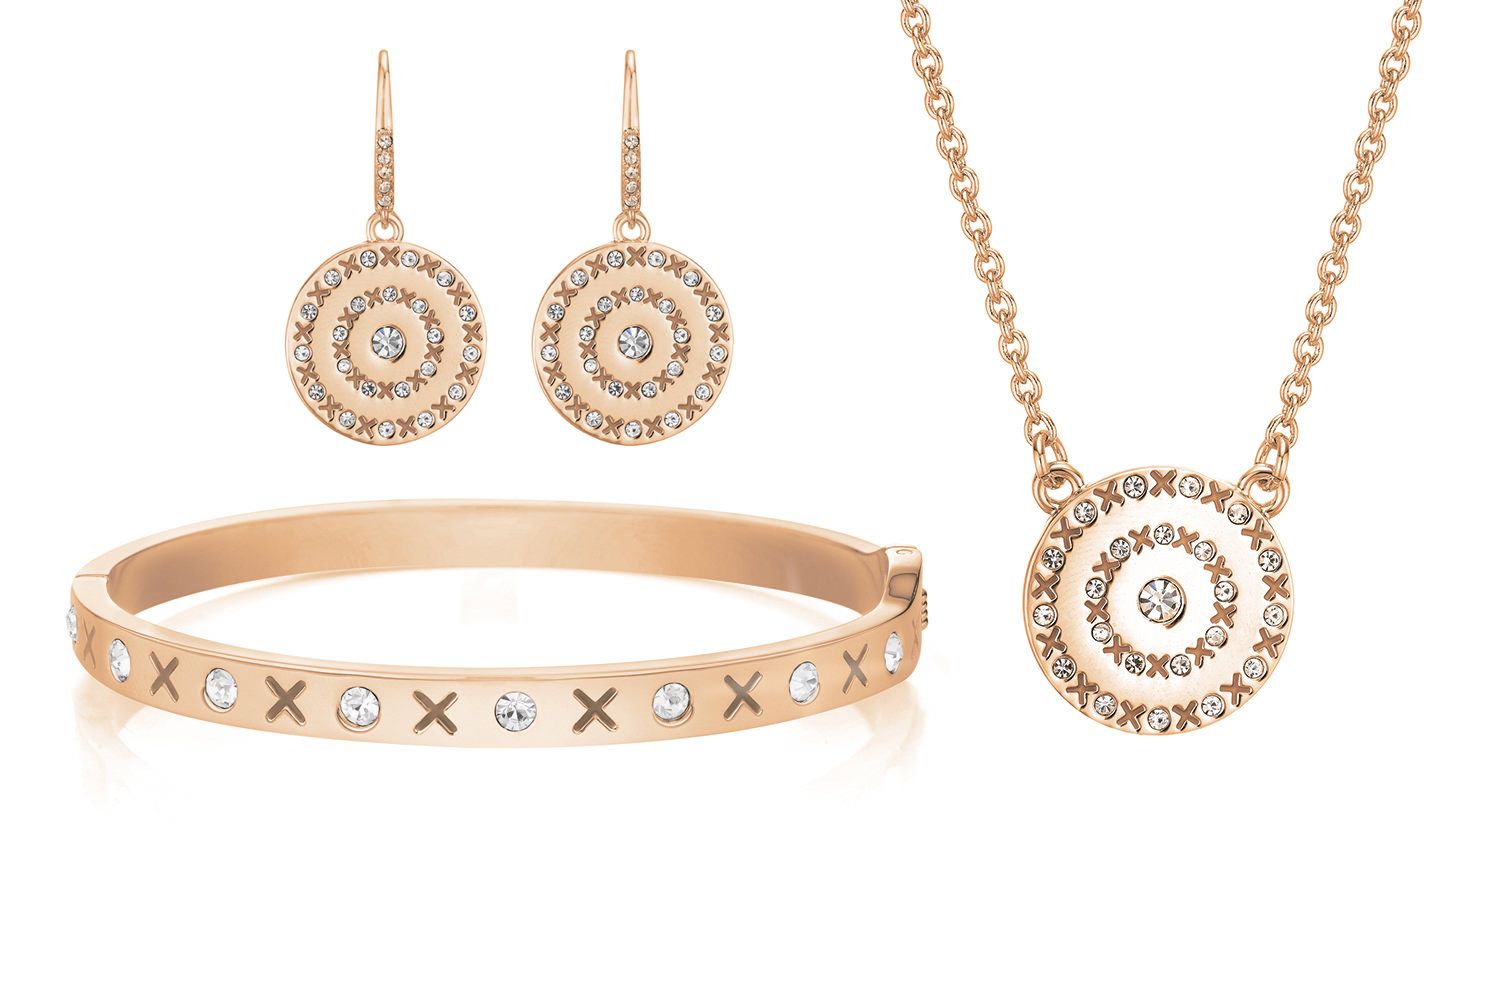 XO Pendant, Bangle and Earring set. Packaged in a Buckley London box.